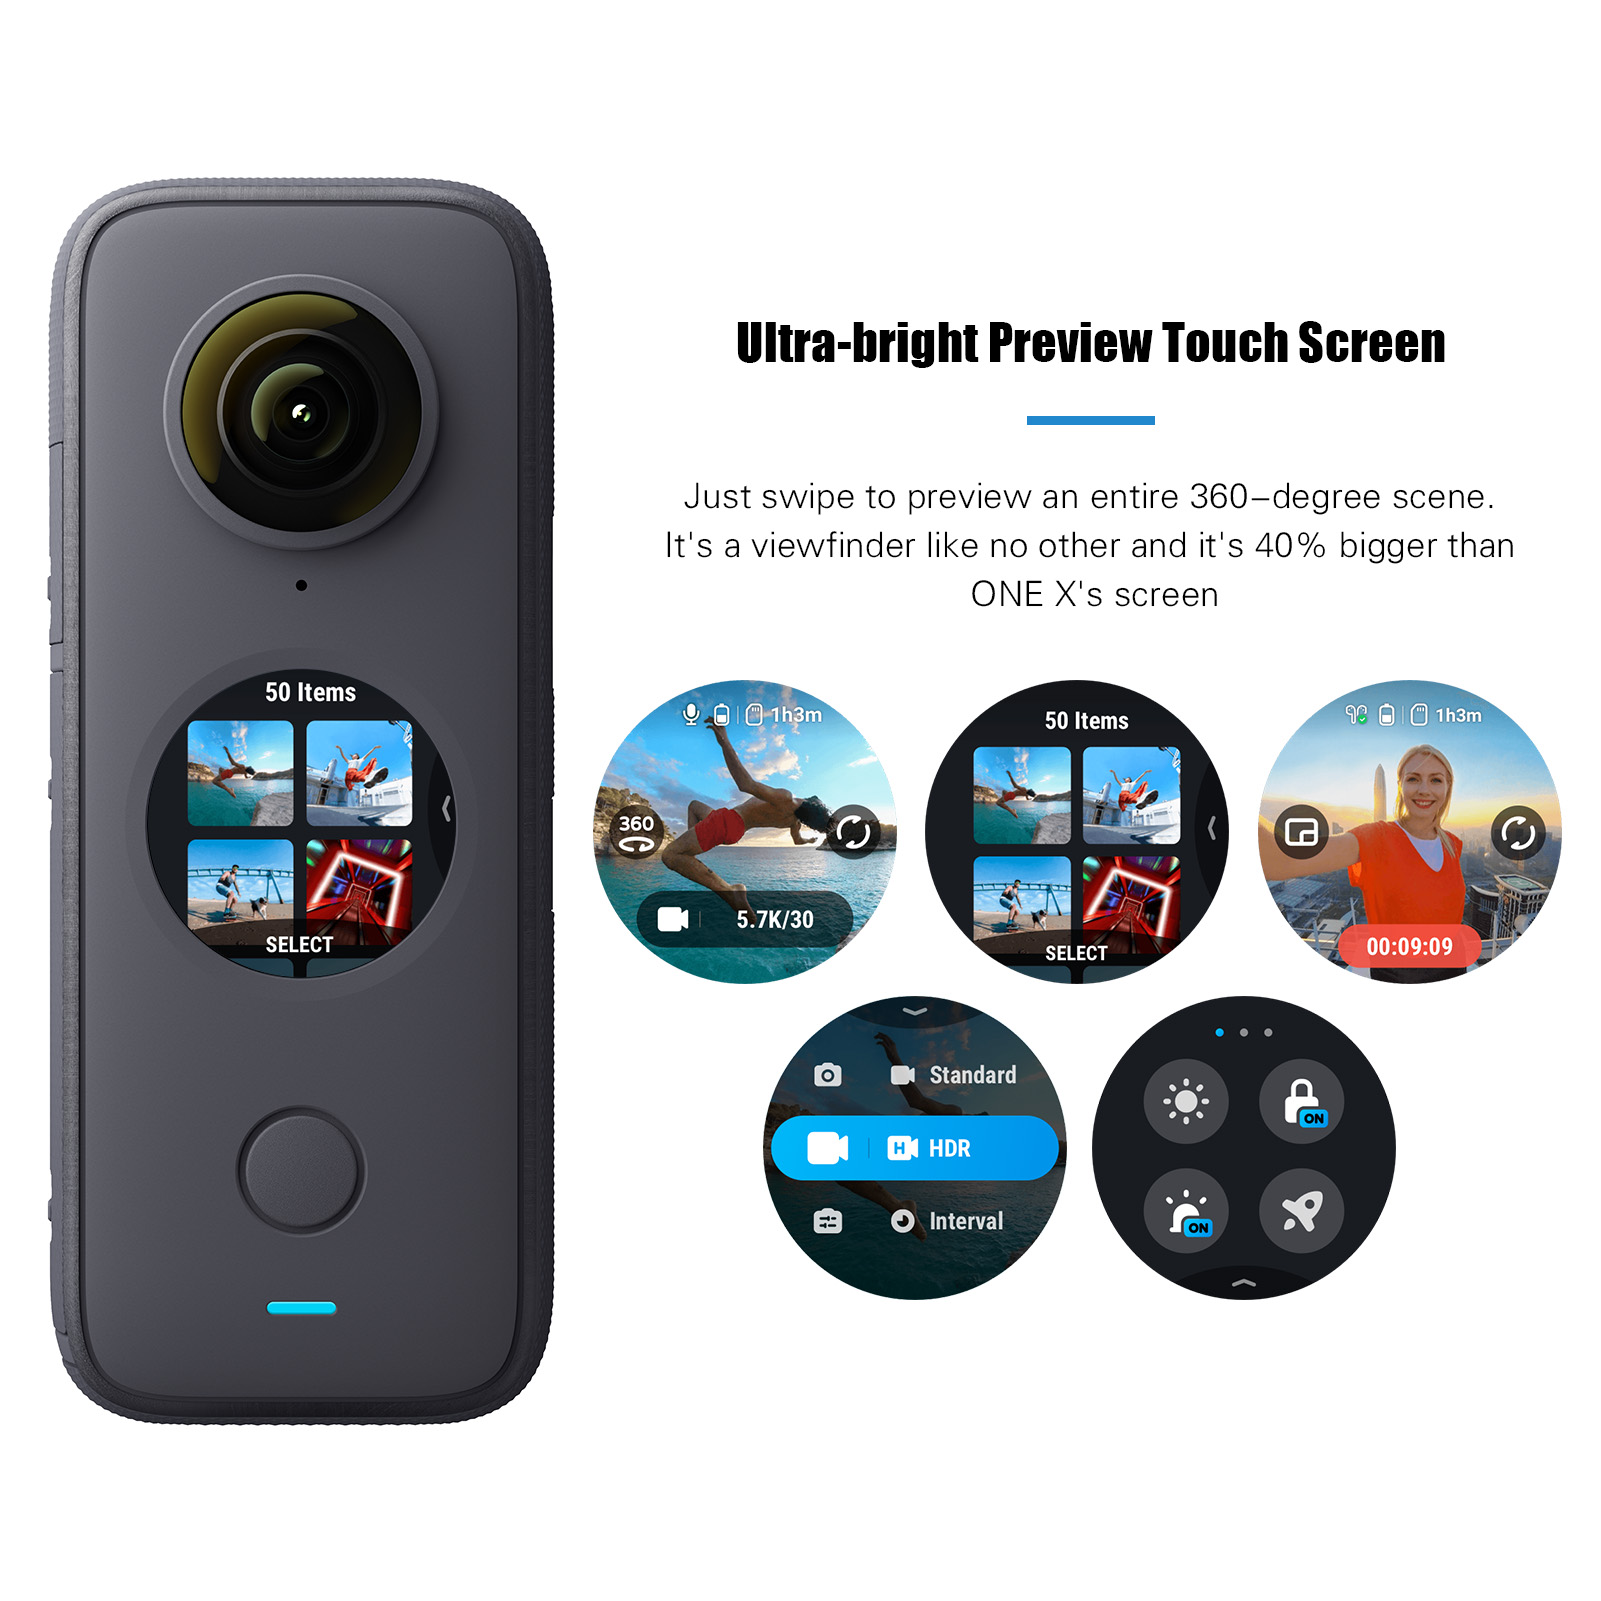 Insta360 Voice Webcam, Time 360 Waterproof Sports X2 WiFi Action Camera,5.7K Screen,Live Transfer Stabilization, Documentation Degree Streaming, ONE 30fps Video Construction Control,Real Touch